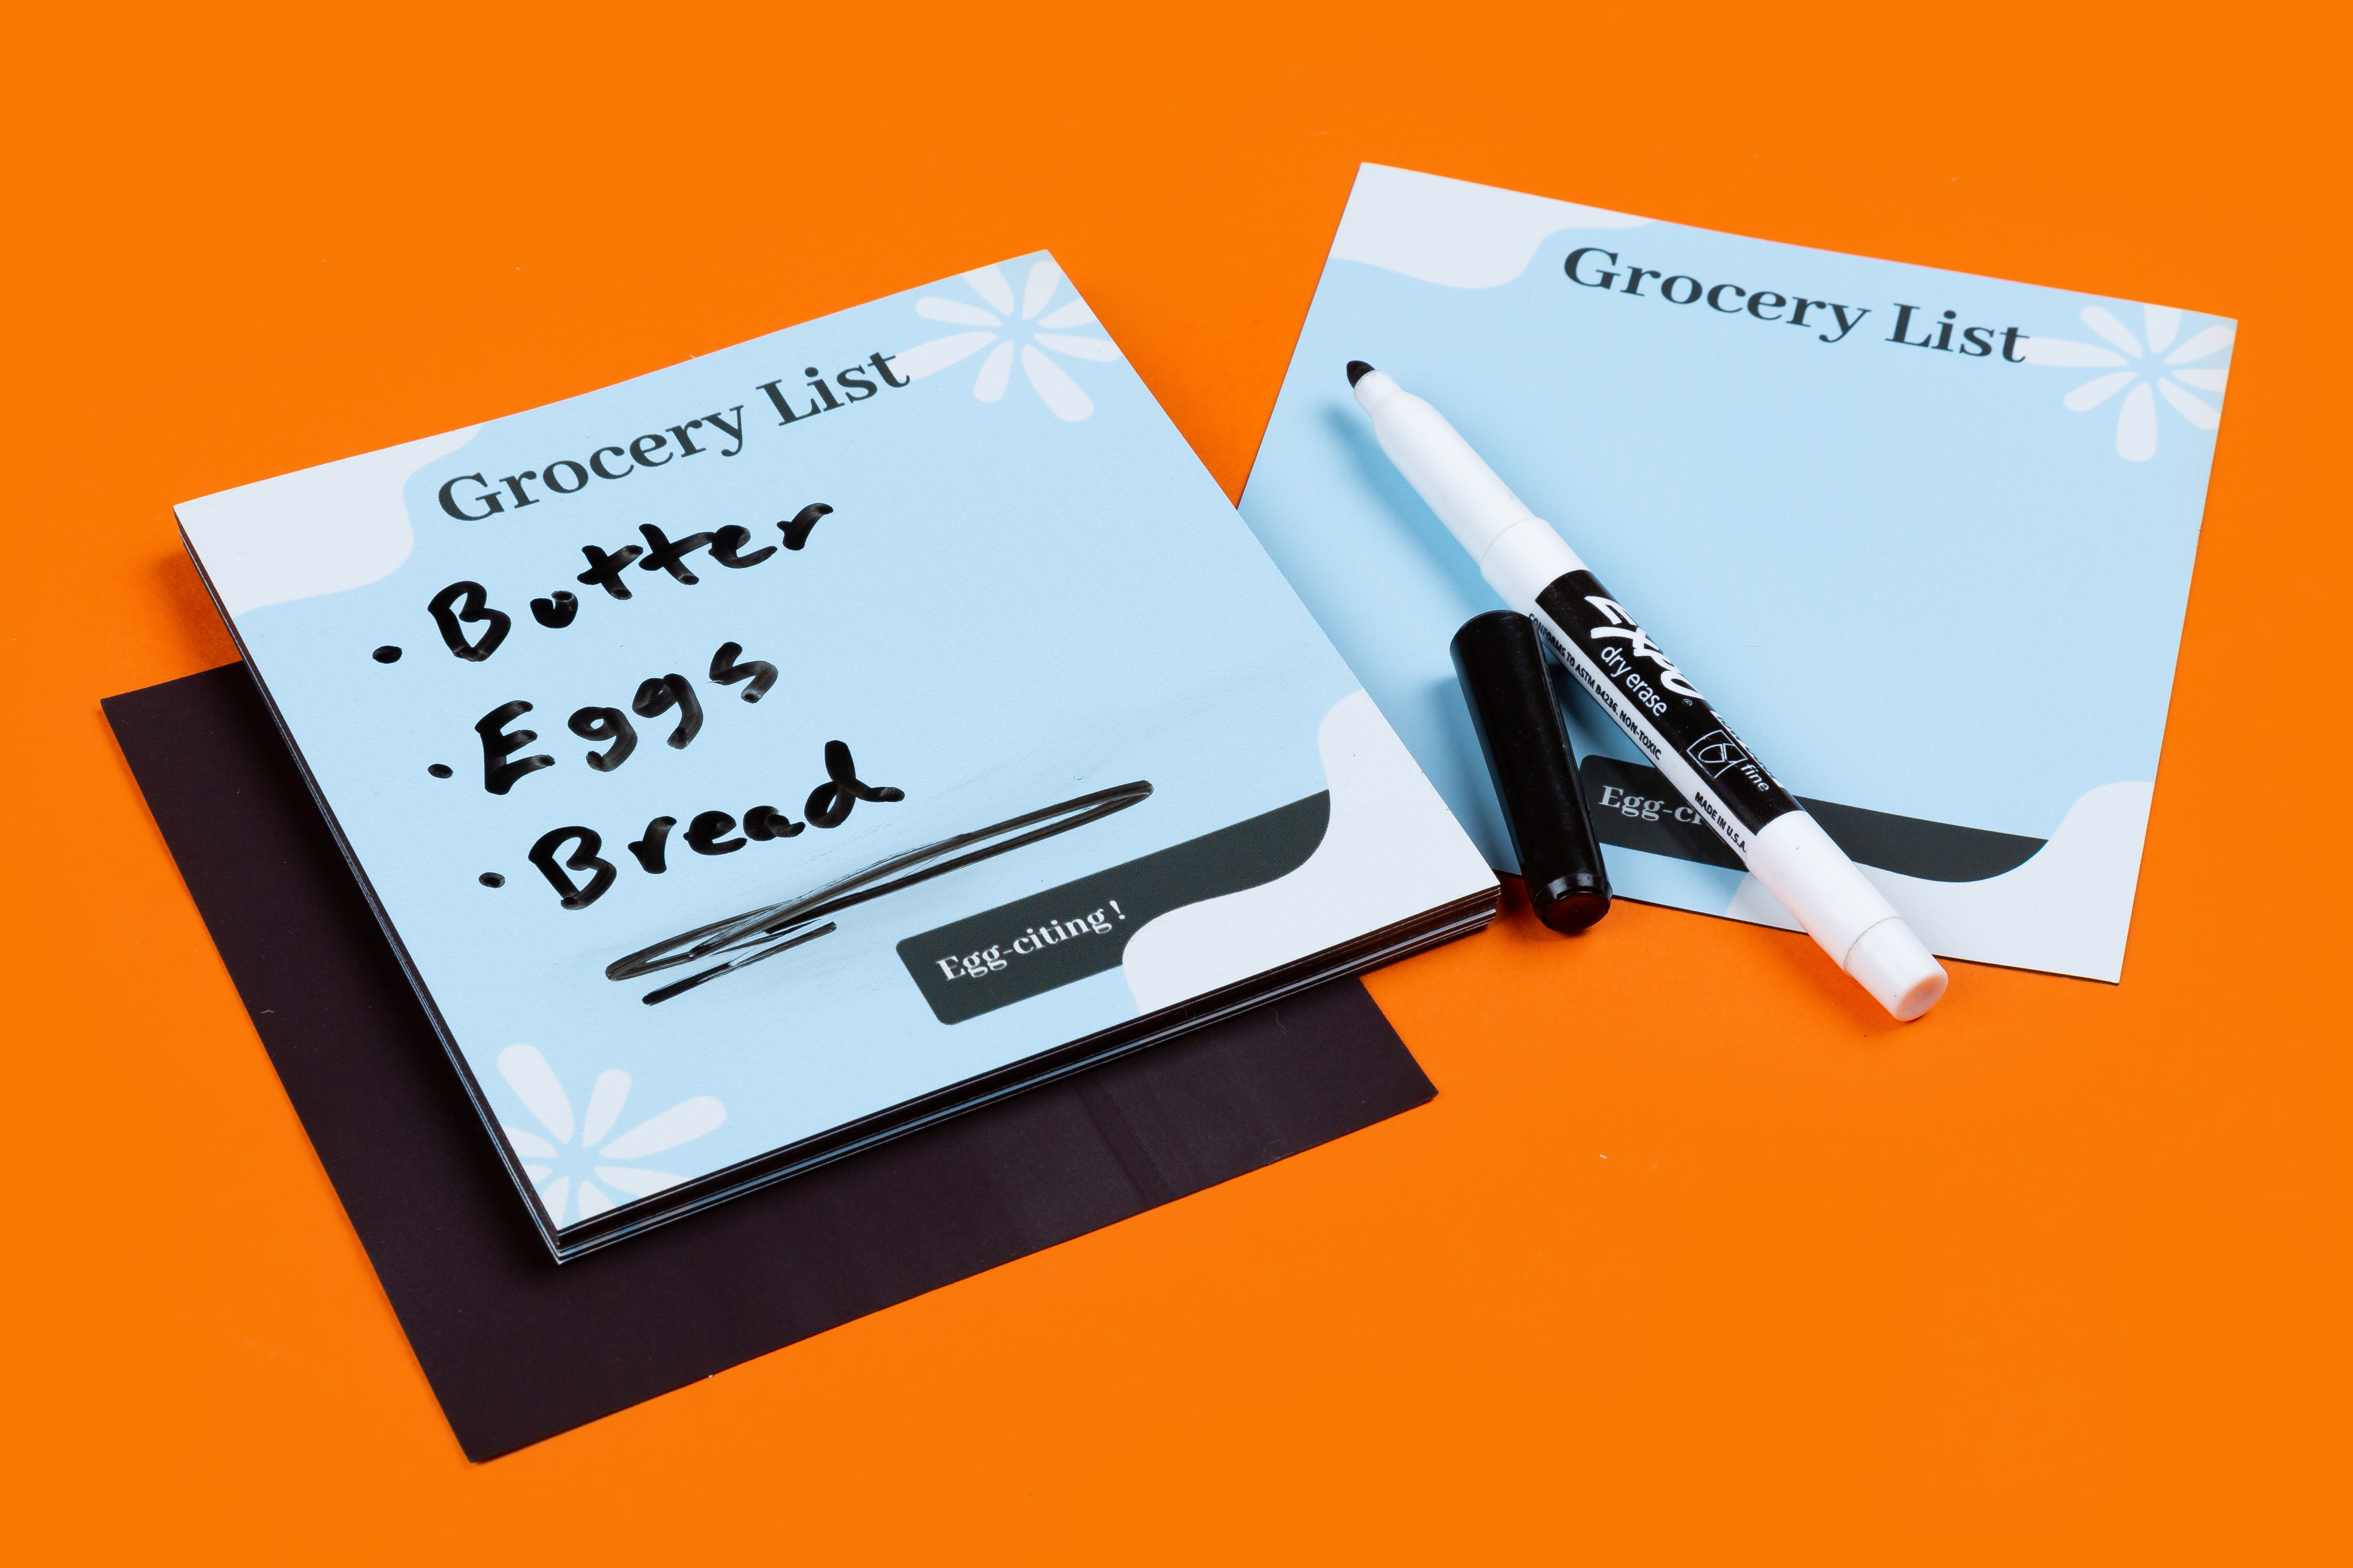 grocery list written on a custom magnet with dry erase marker